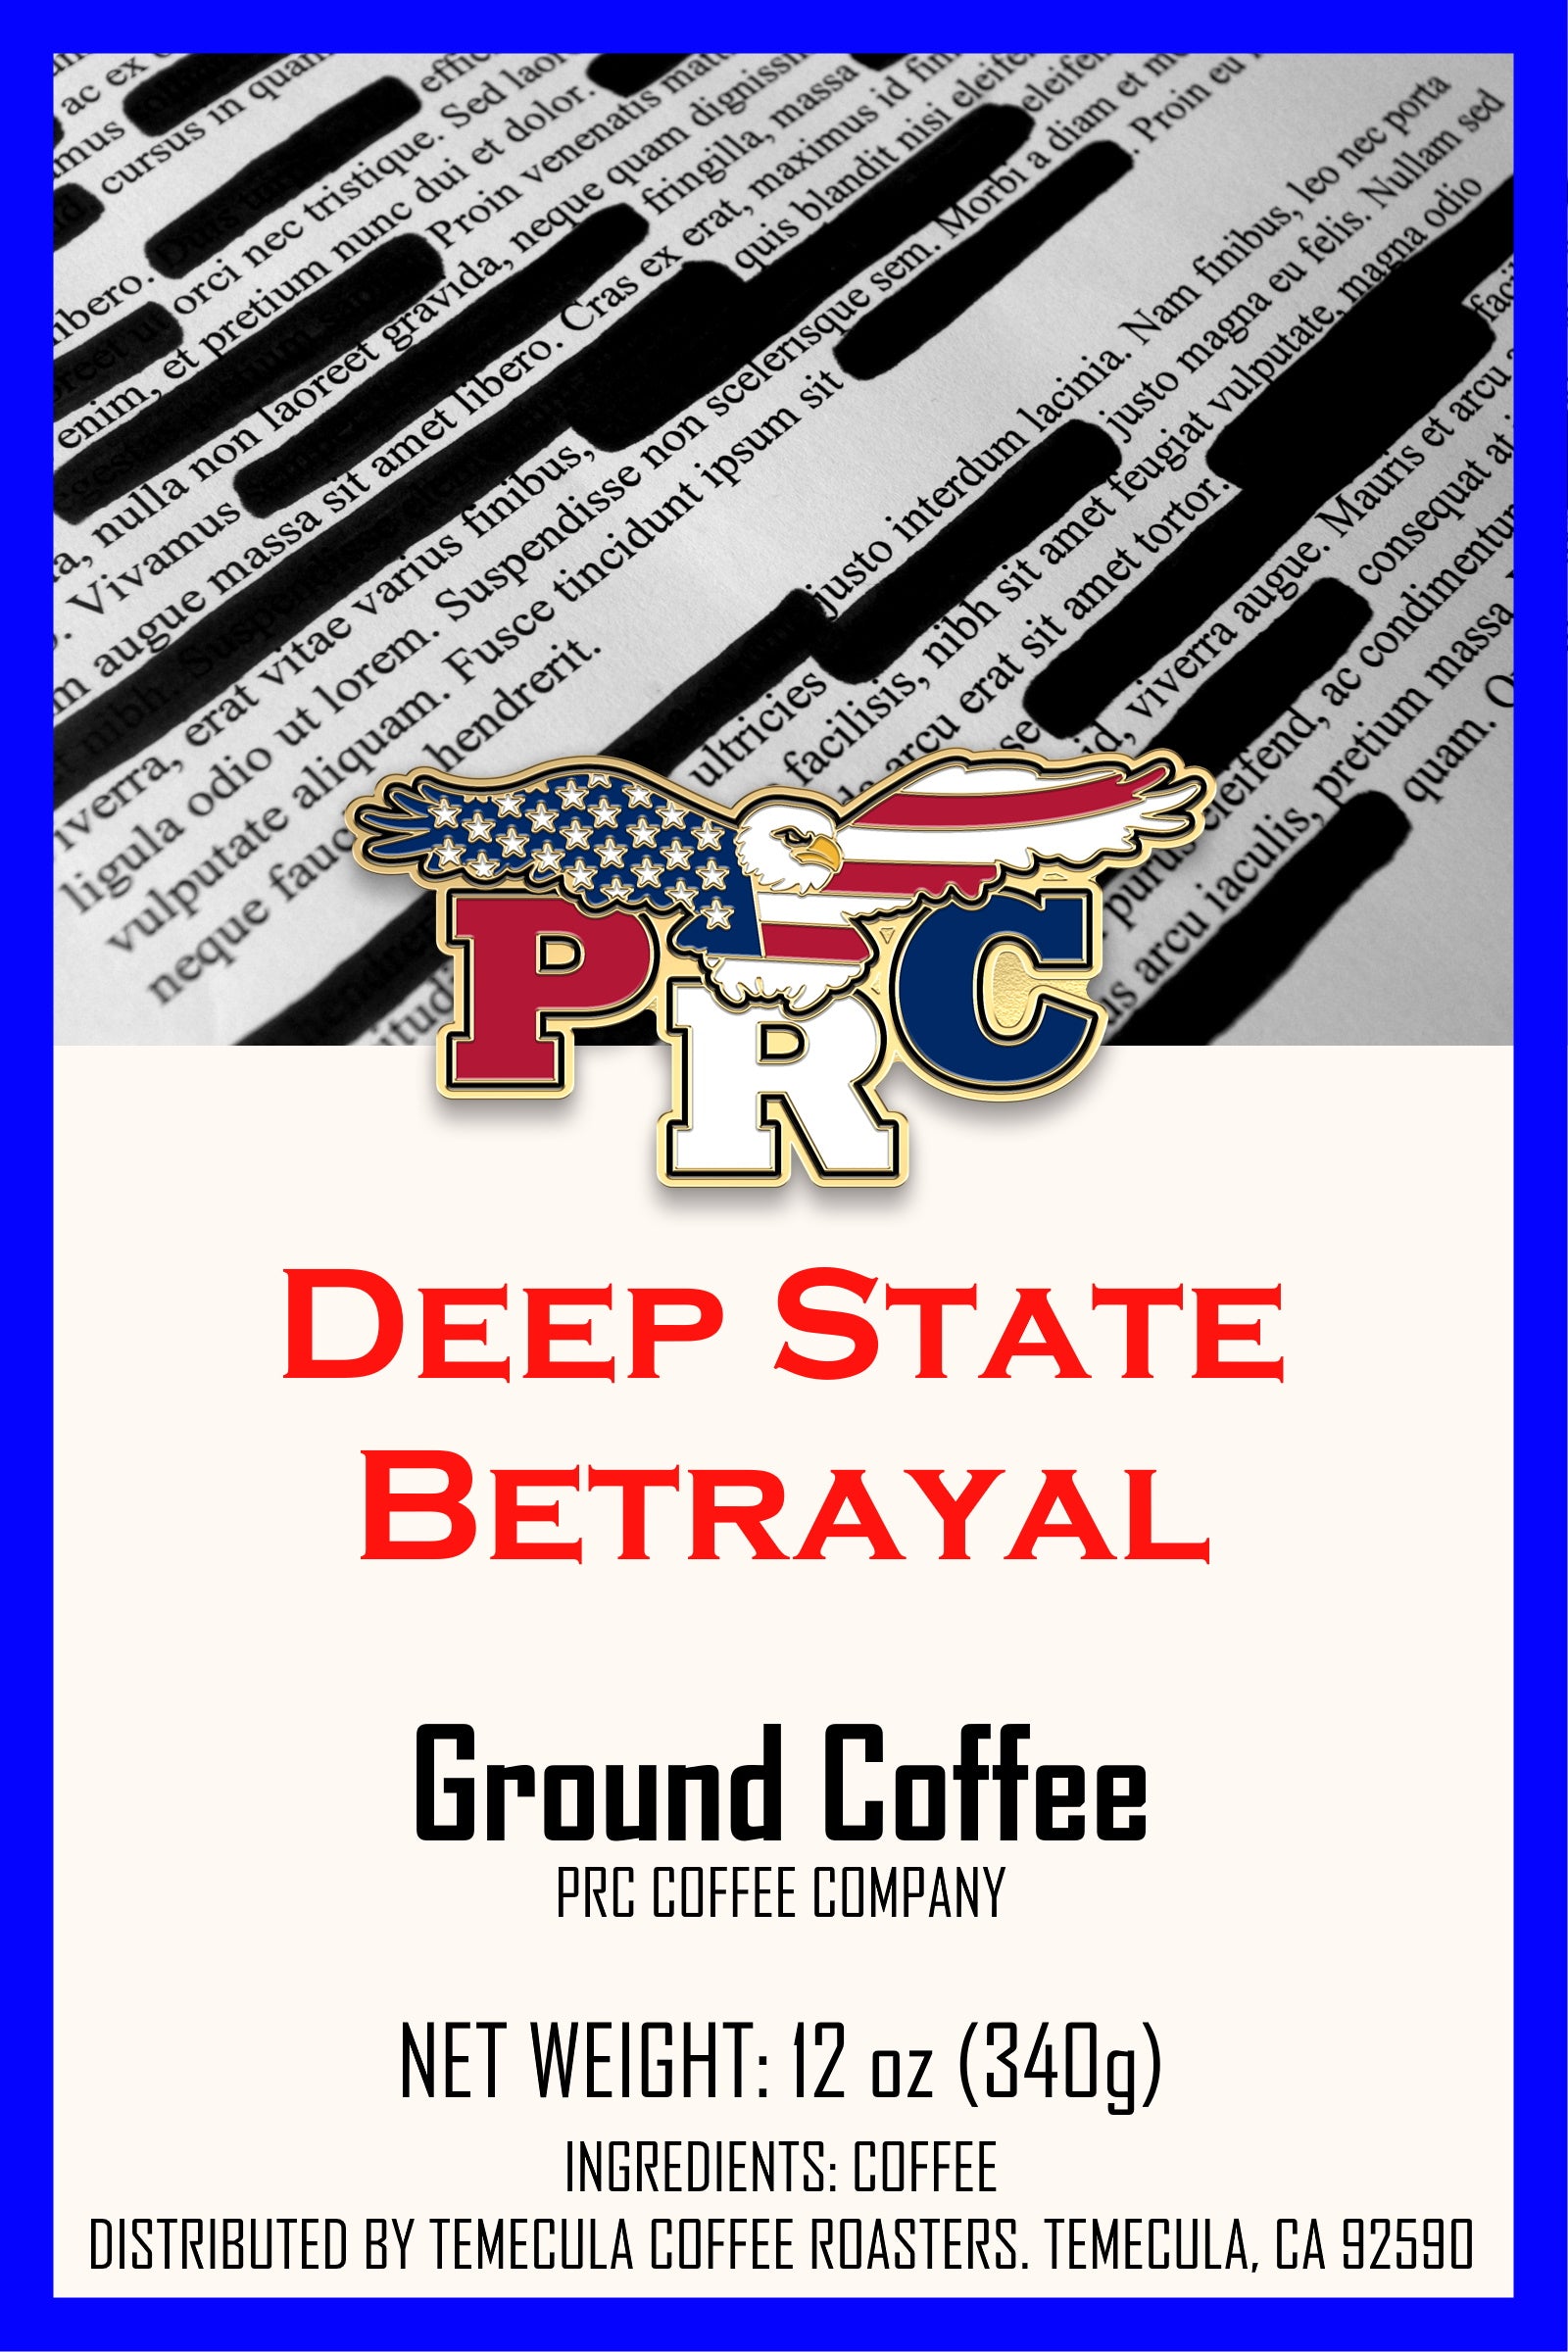 Deep State Betrayal<br><font size = "4">Costa Rican</font>